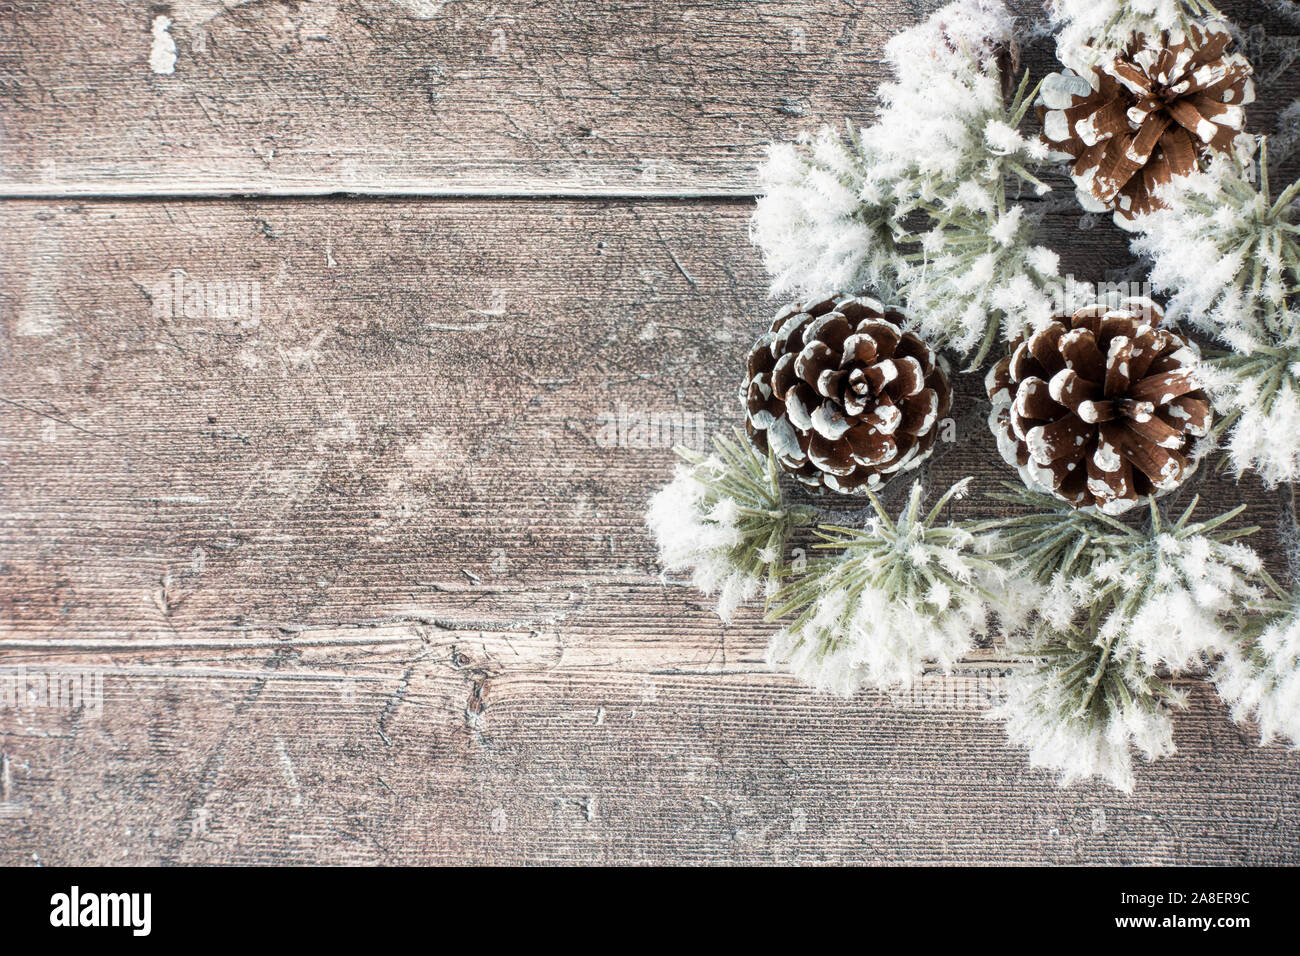 Snow covered atlas cedar branch and pine cones on brown rustic wood with copy space. Top view. Stock Photo